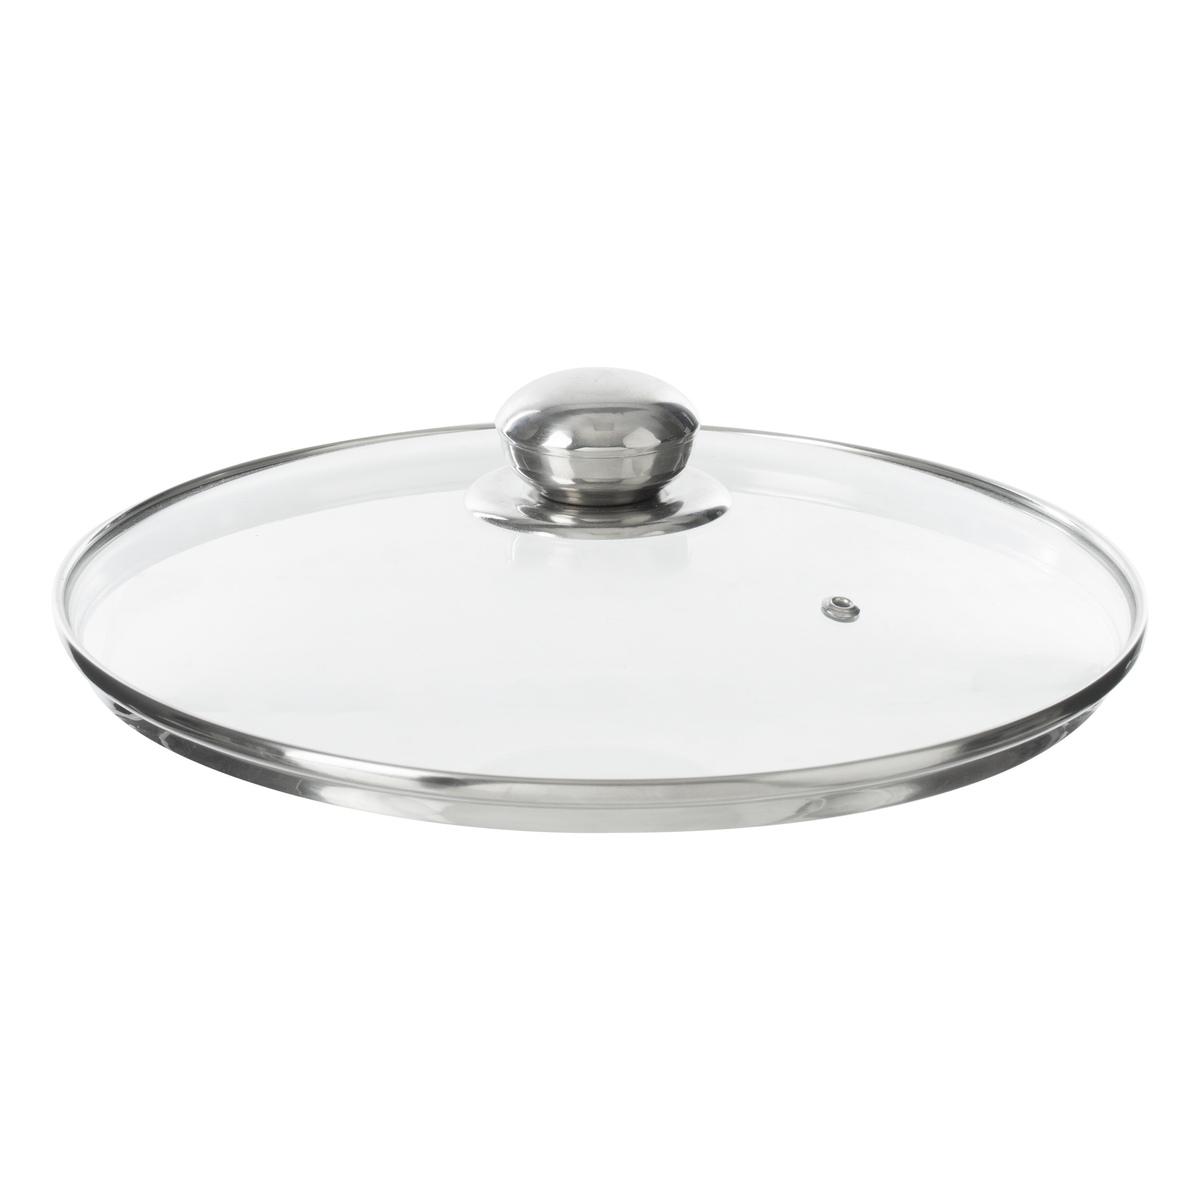 Couscousier D26cm in stainless steel - Deco, Furniture for Professionals -  Decoration Brands